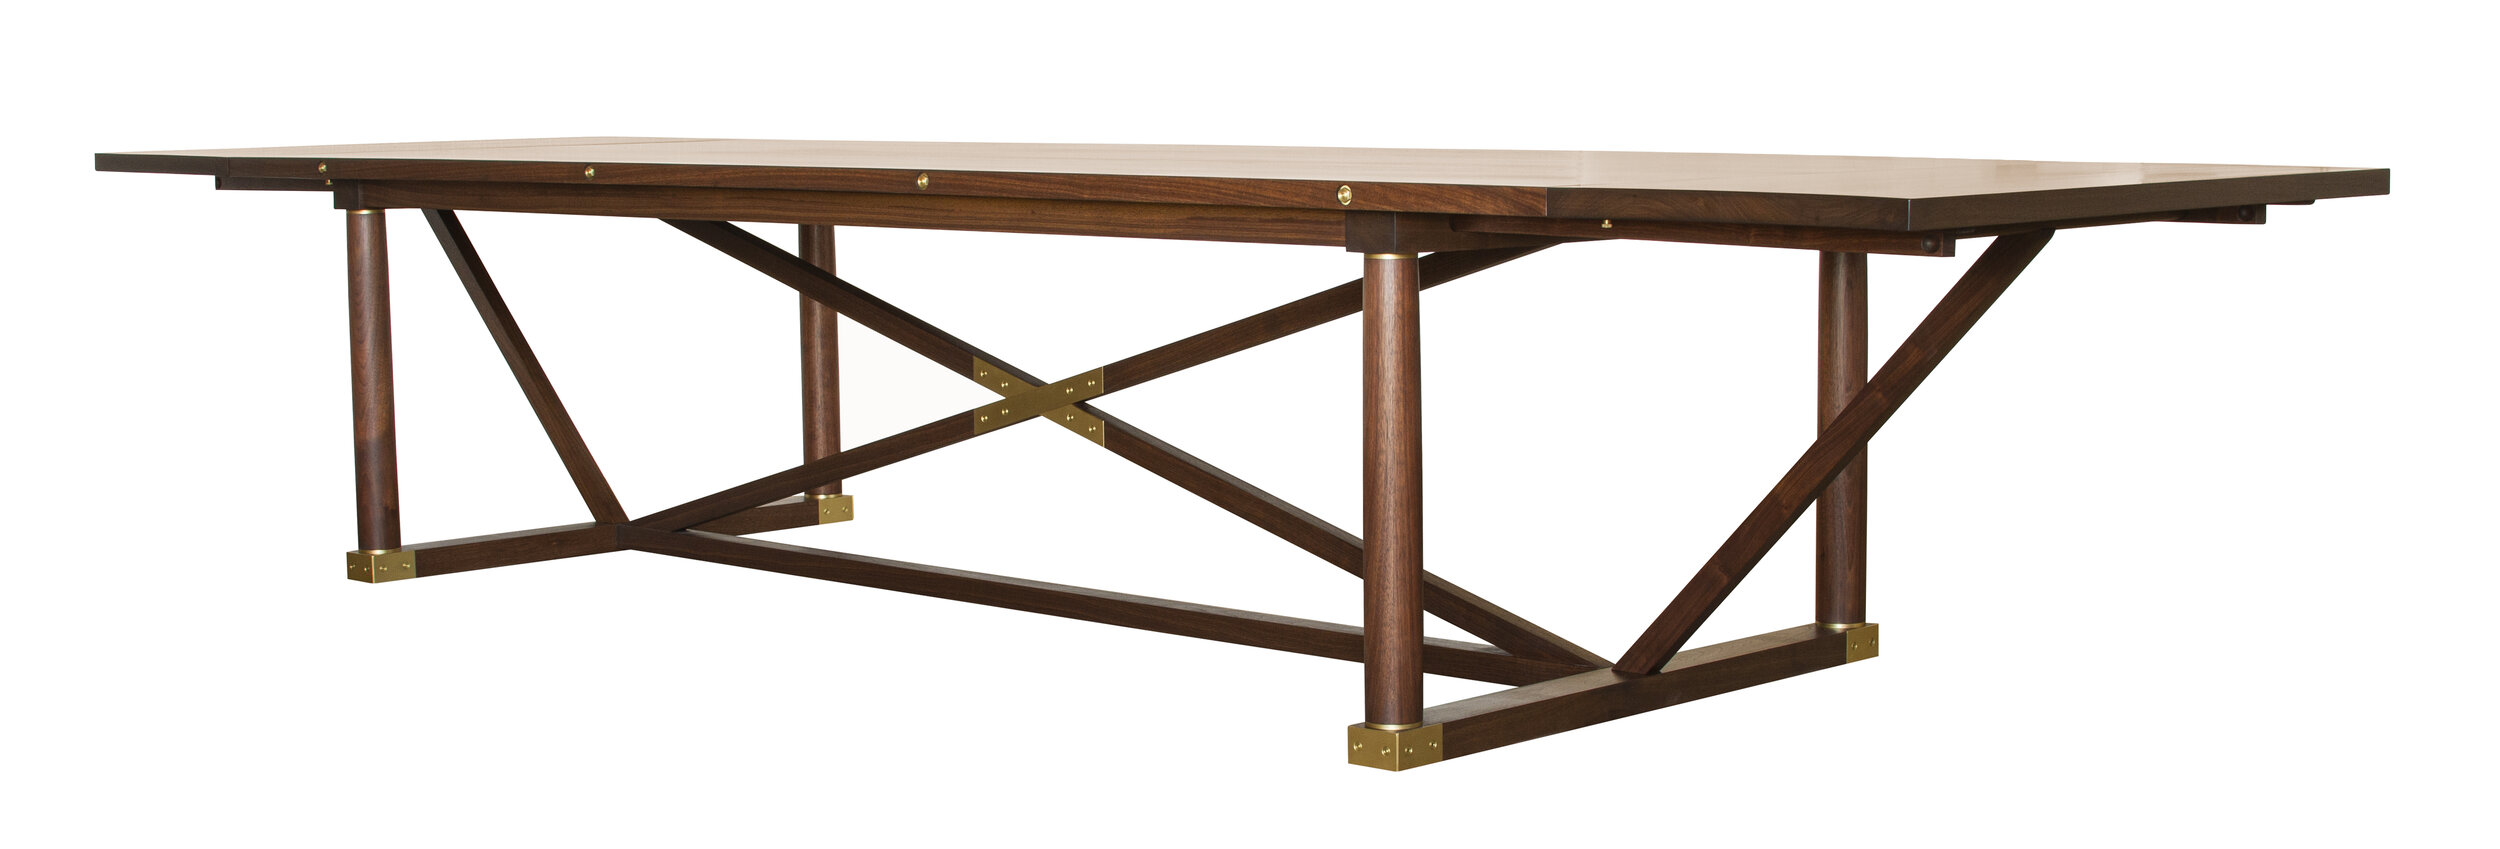 Carden Table with leaf extensions 